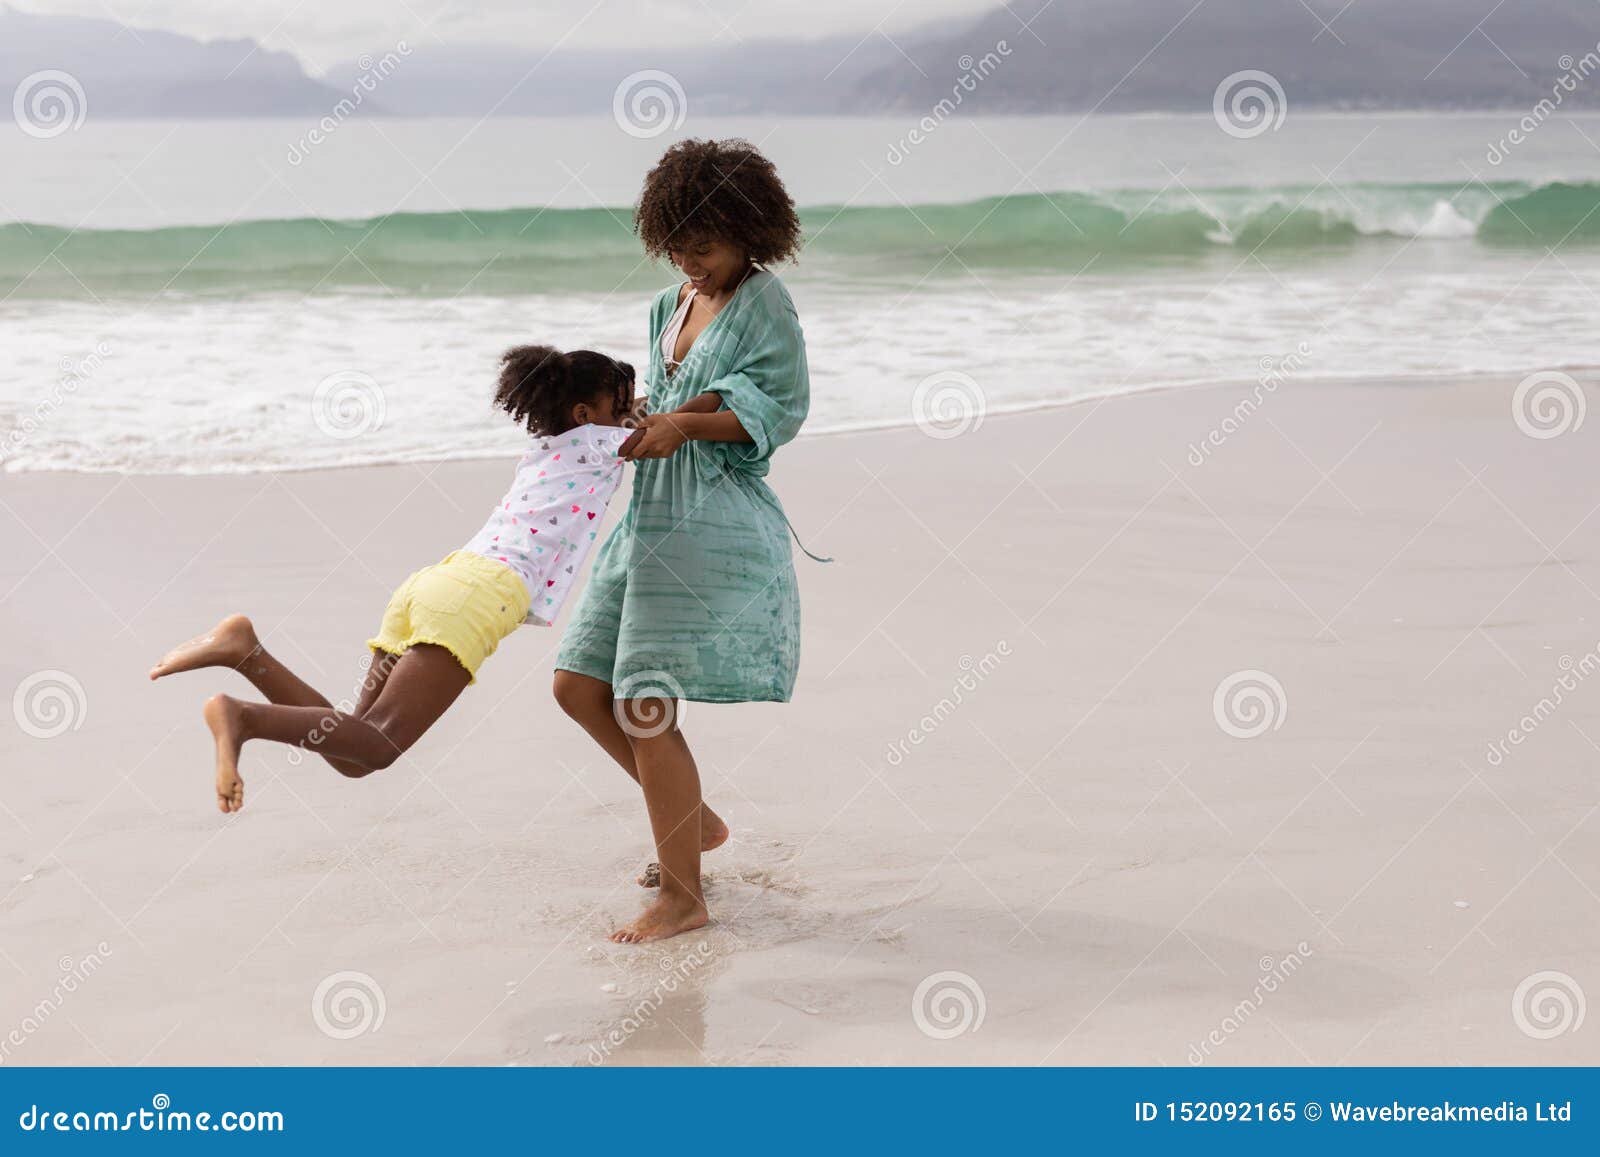 Mother And Daughter Having Fun On The Beach Stock Image Image Of Leisure Bonding 152092165 